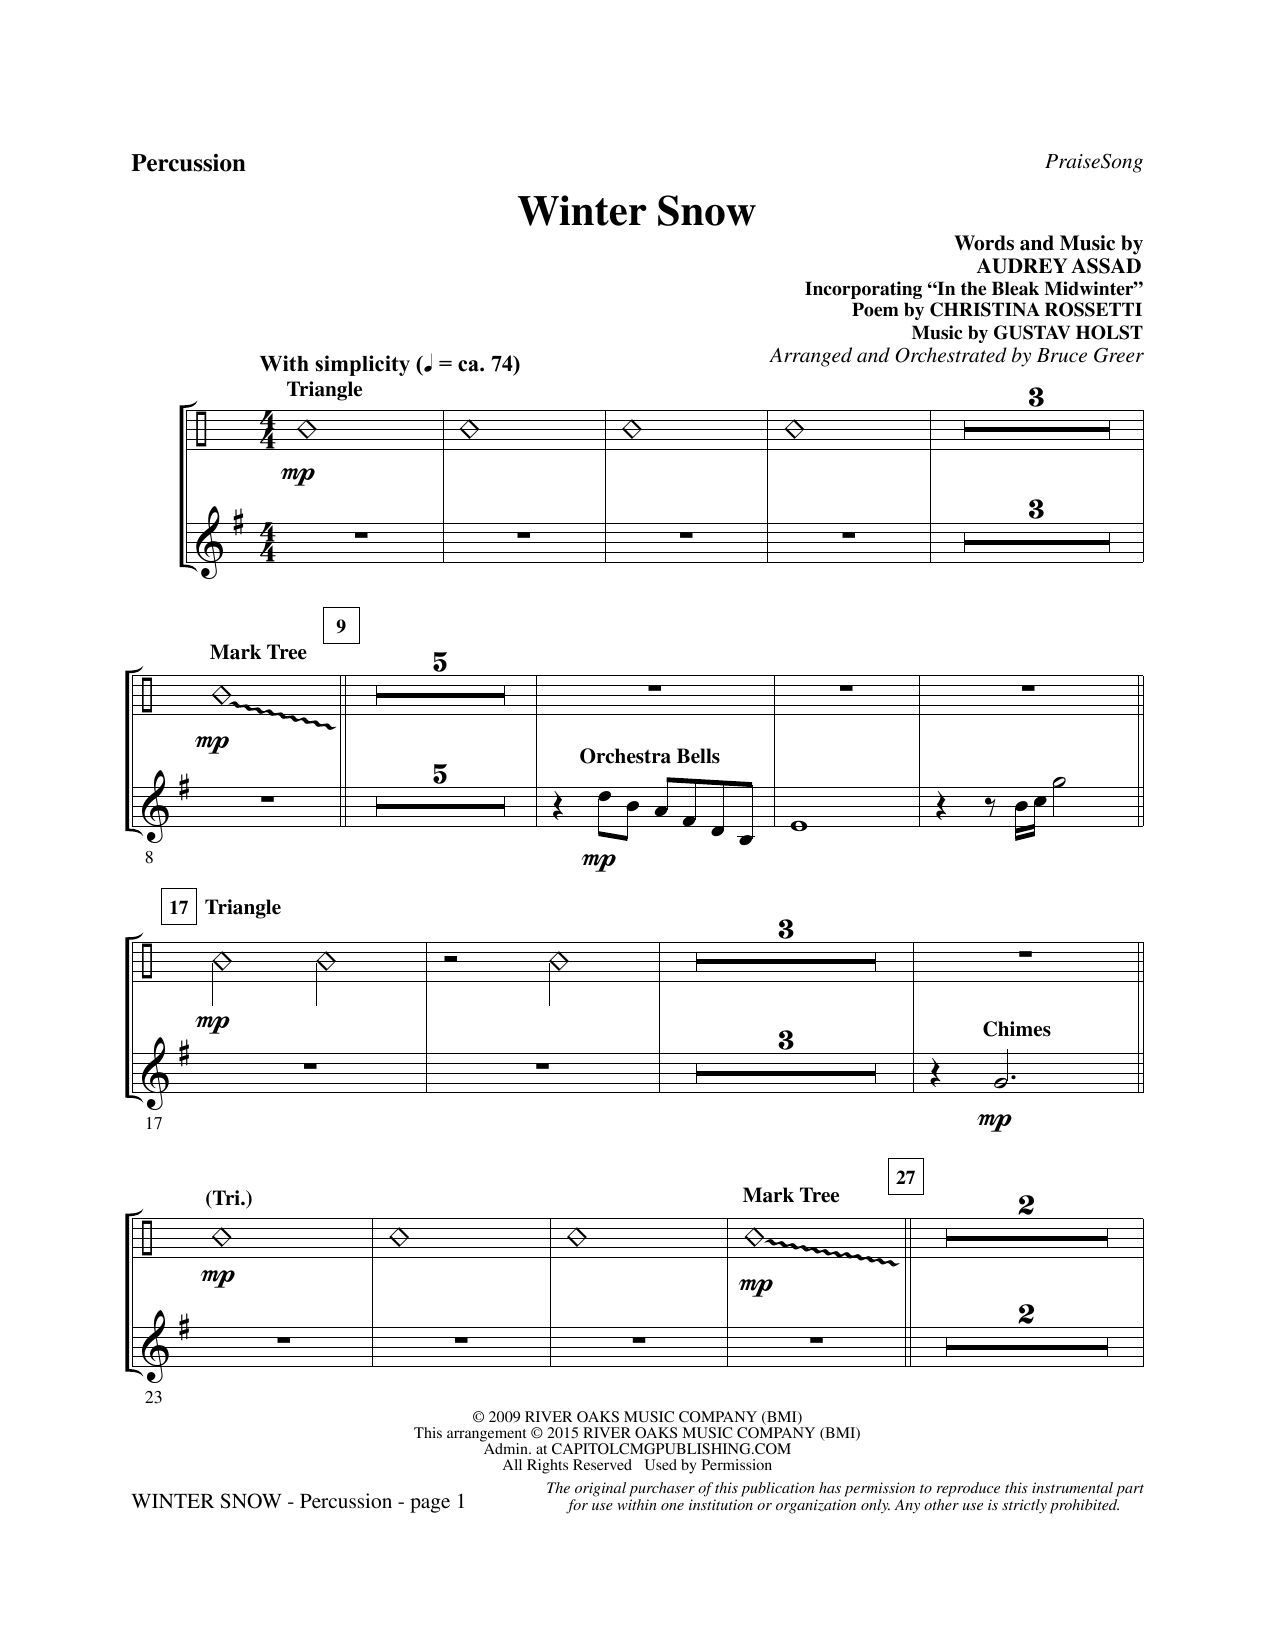 Bruce Greer Winter Snow - Percussion sheet music notes and chords. Download Printable PDF.